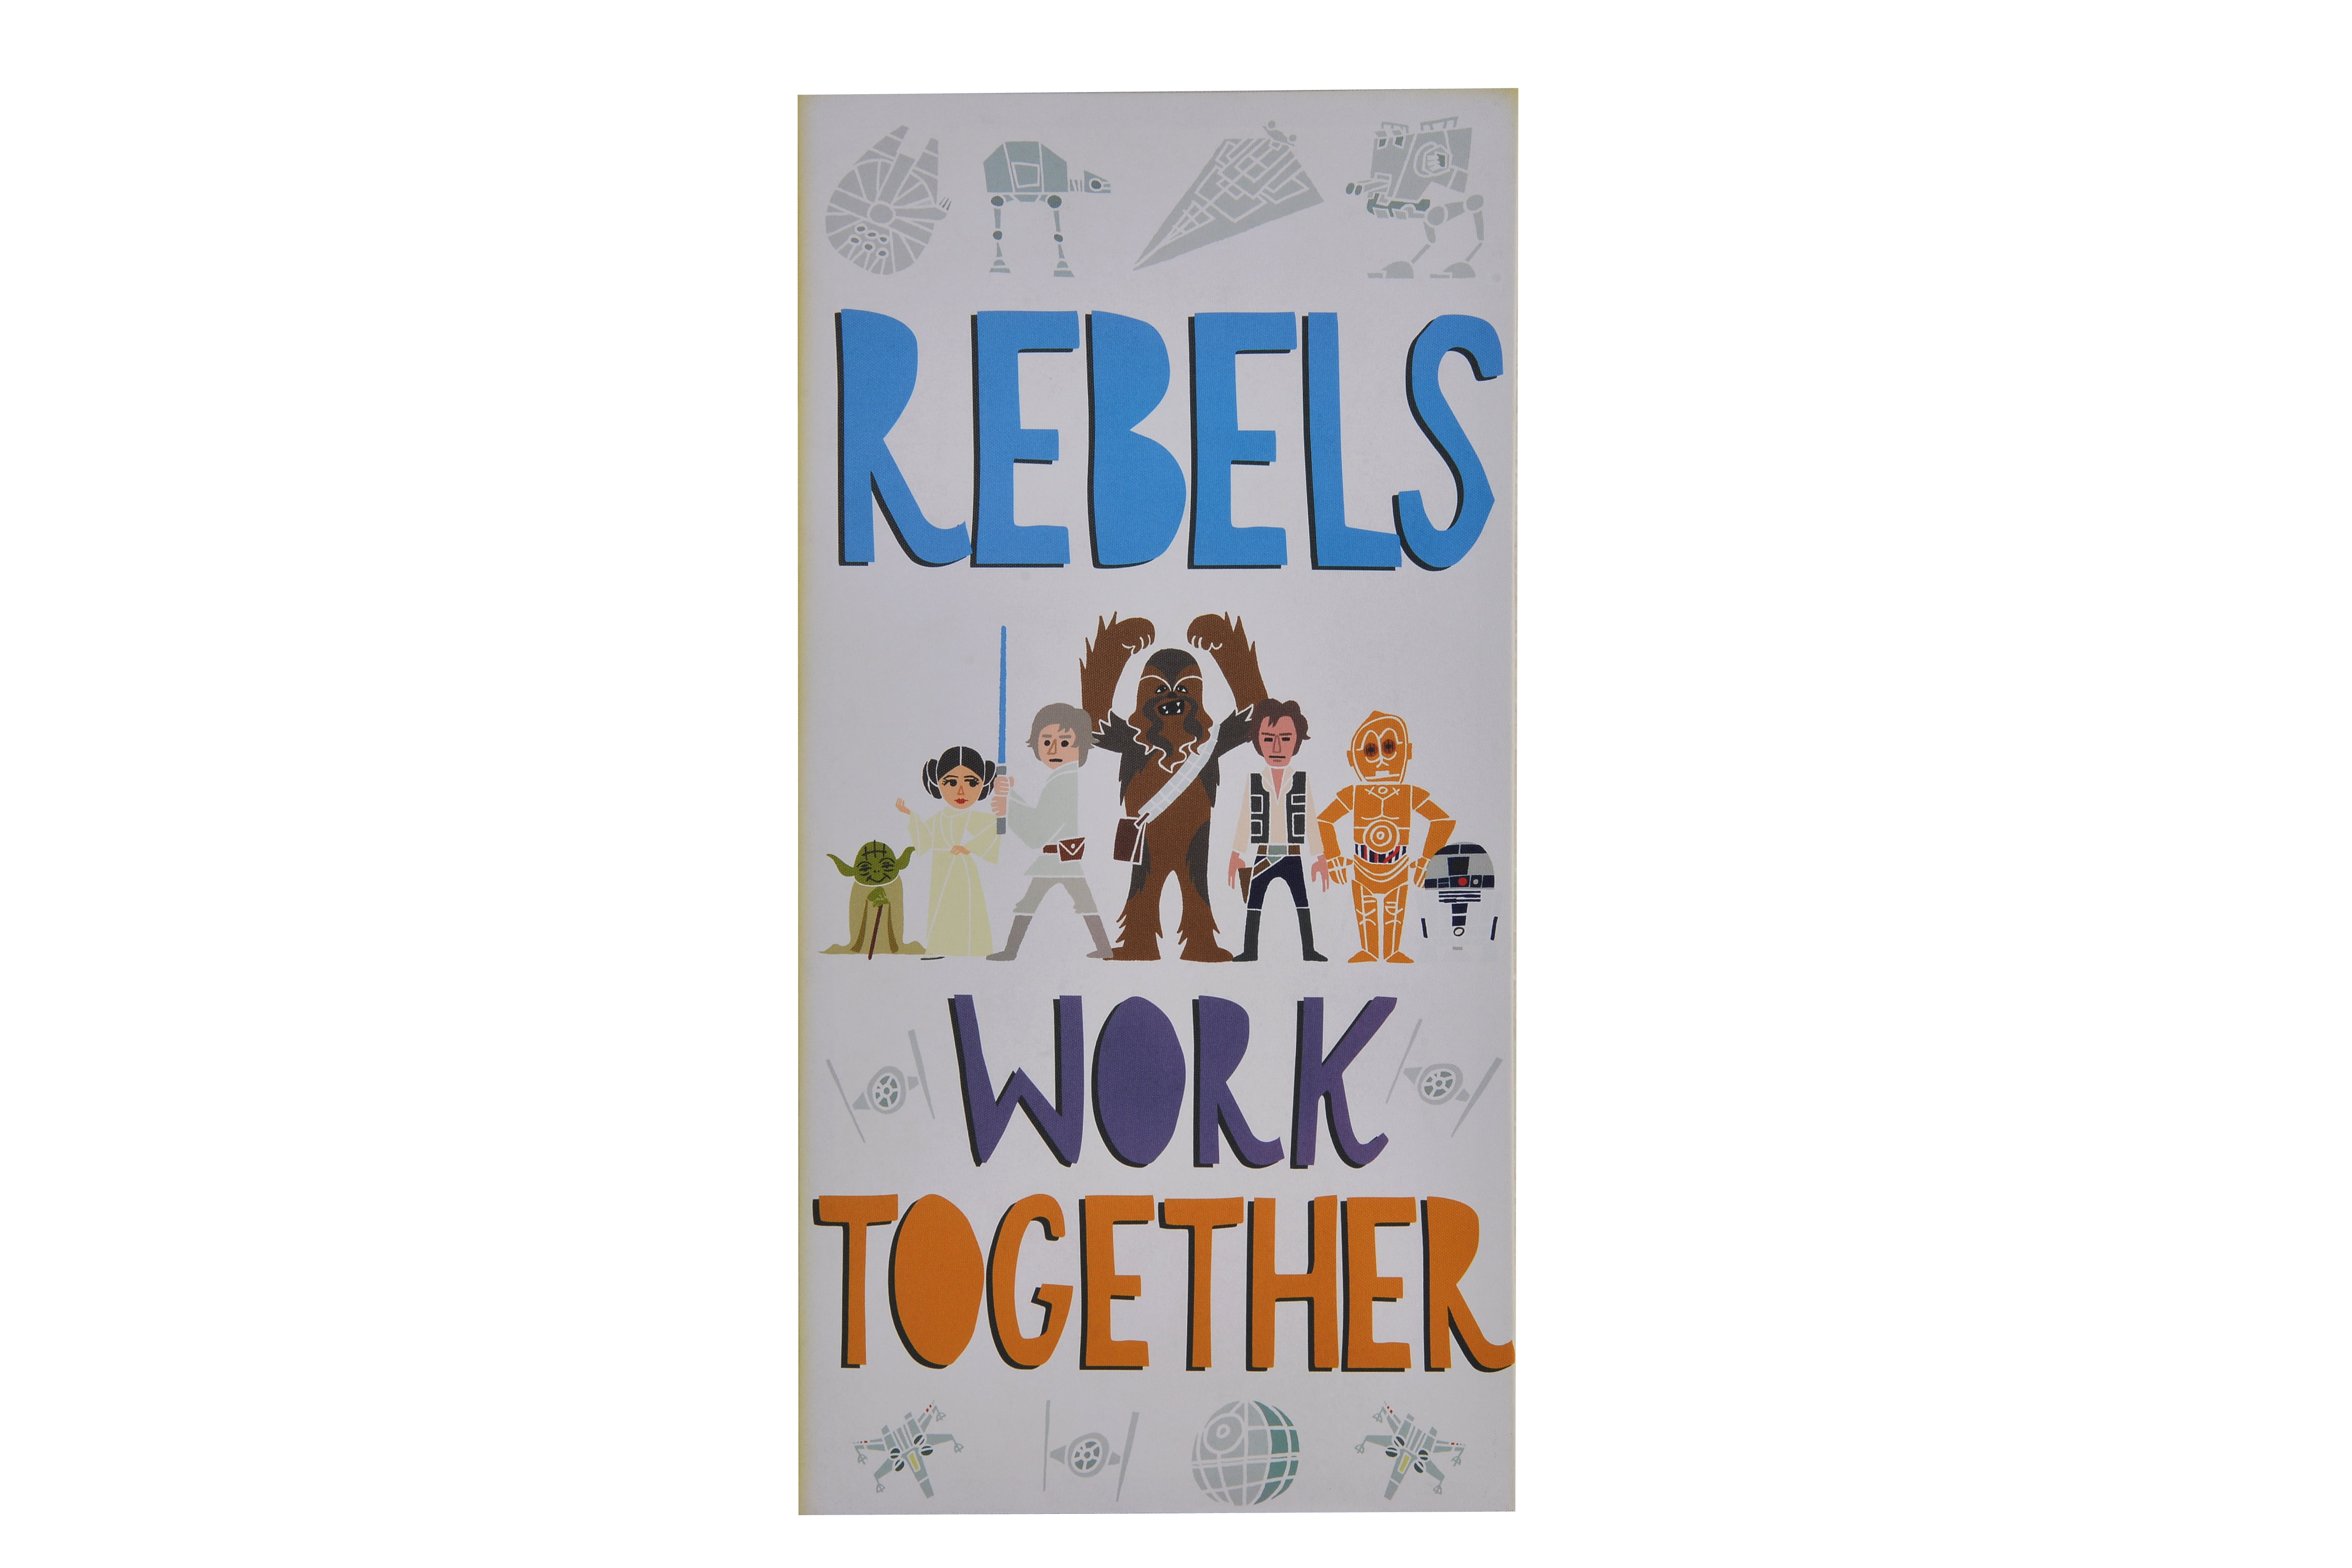 Star Wars "Rebels Work Together" Canvas Wall Decor 